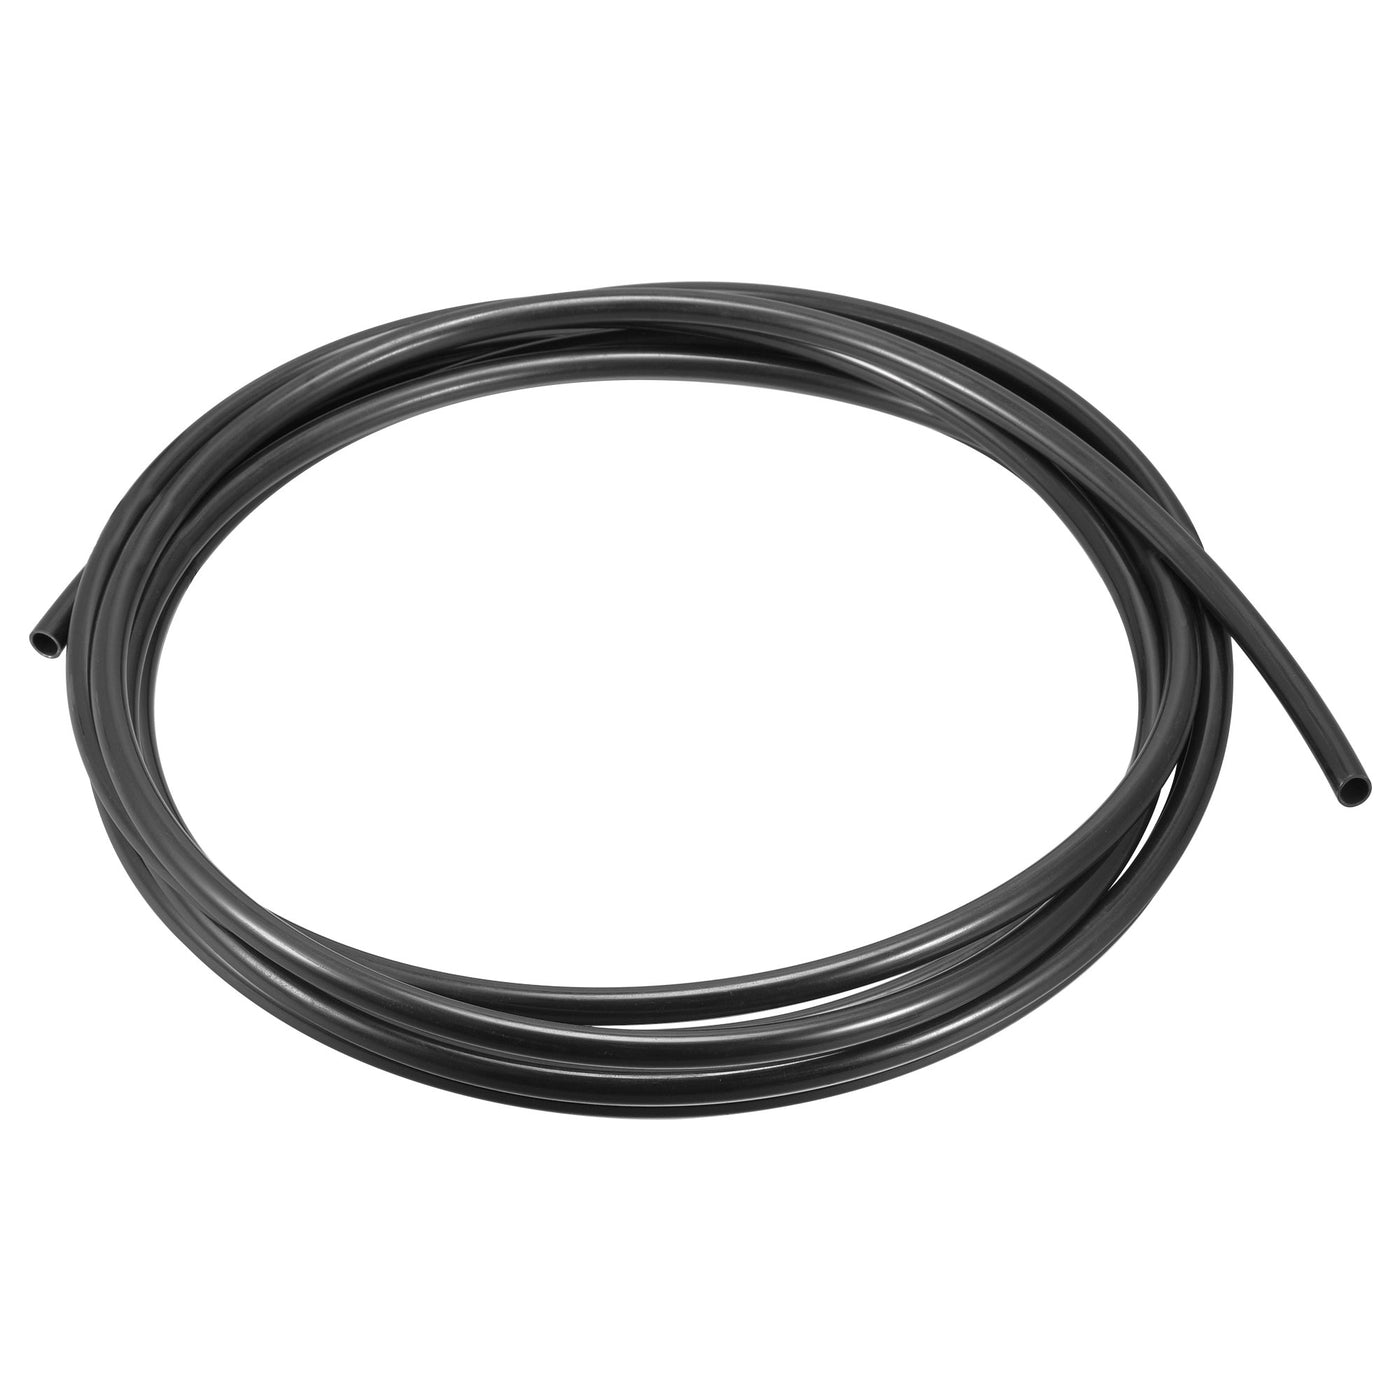 uxcell Uxcell Pneumatic Tubing Air Brake Hose Air Line Tubing Pipe Nylon